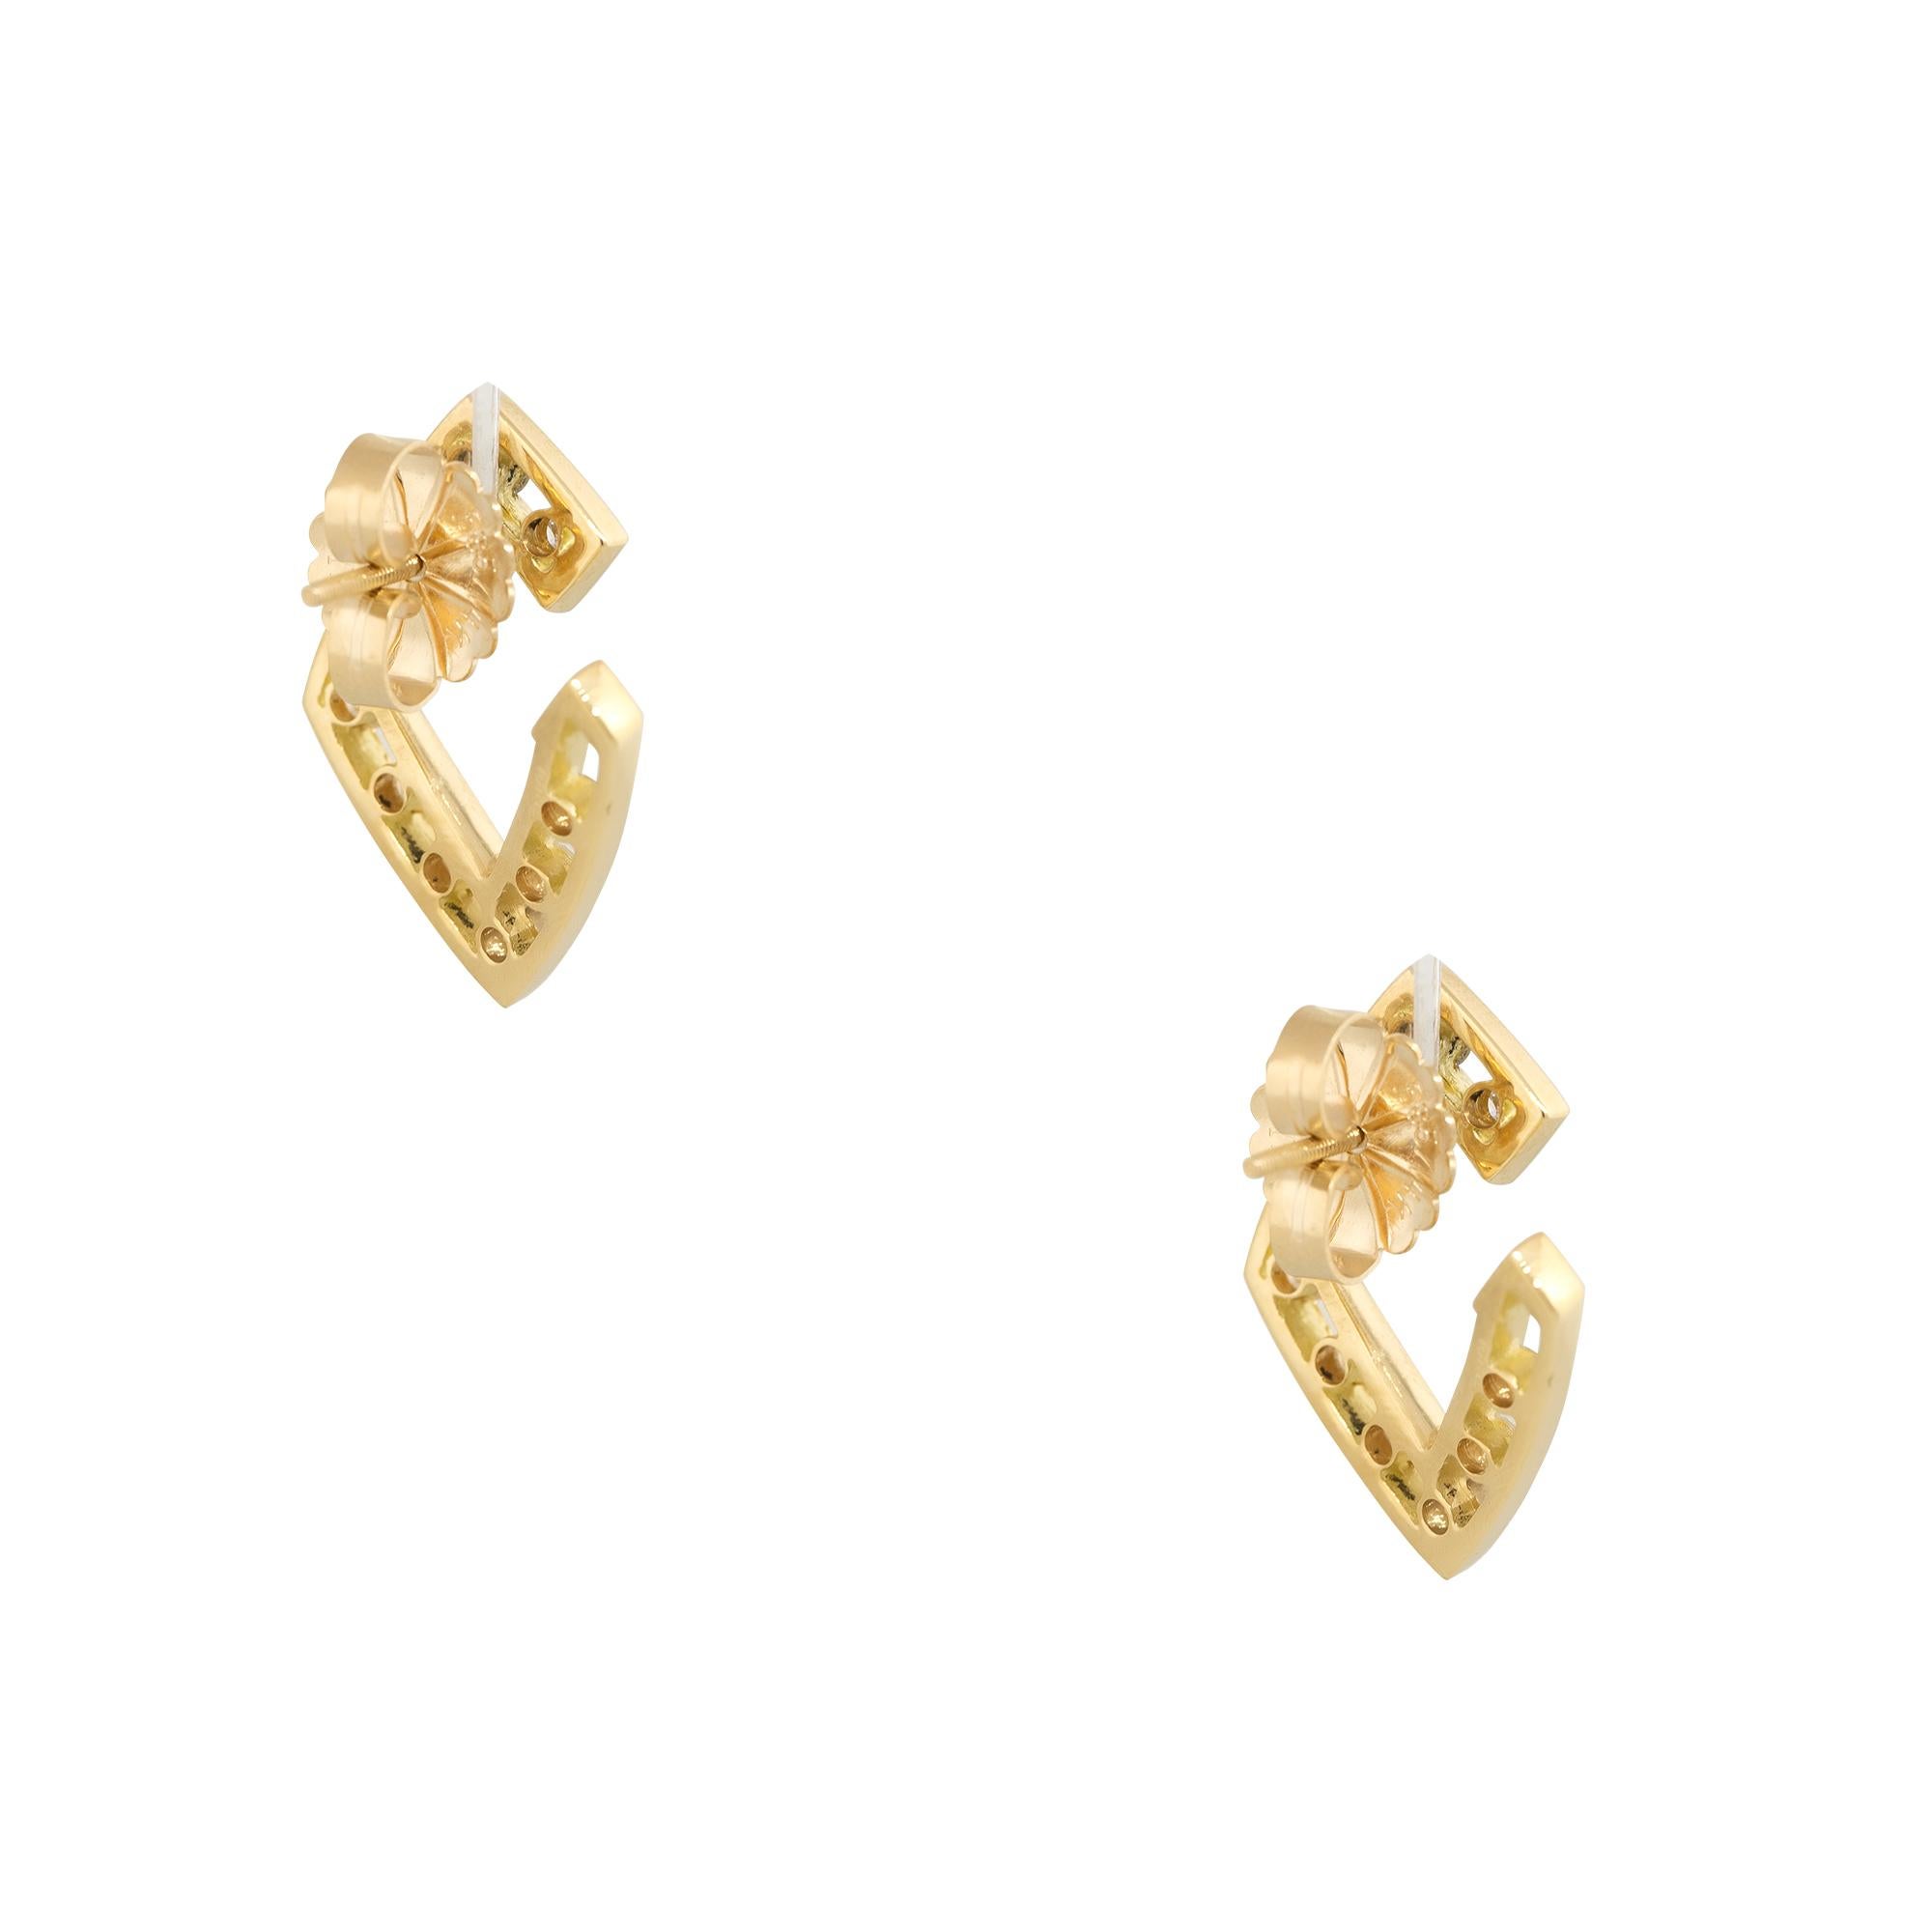 0.70 Carat Round Brilliant Cut Floating Diamond Earrings 18 Karat In Stock In Excellent Condition For Sale In Boca Raton, FL